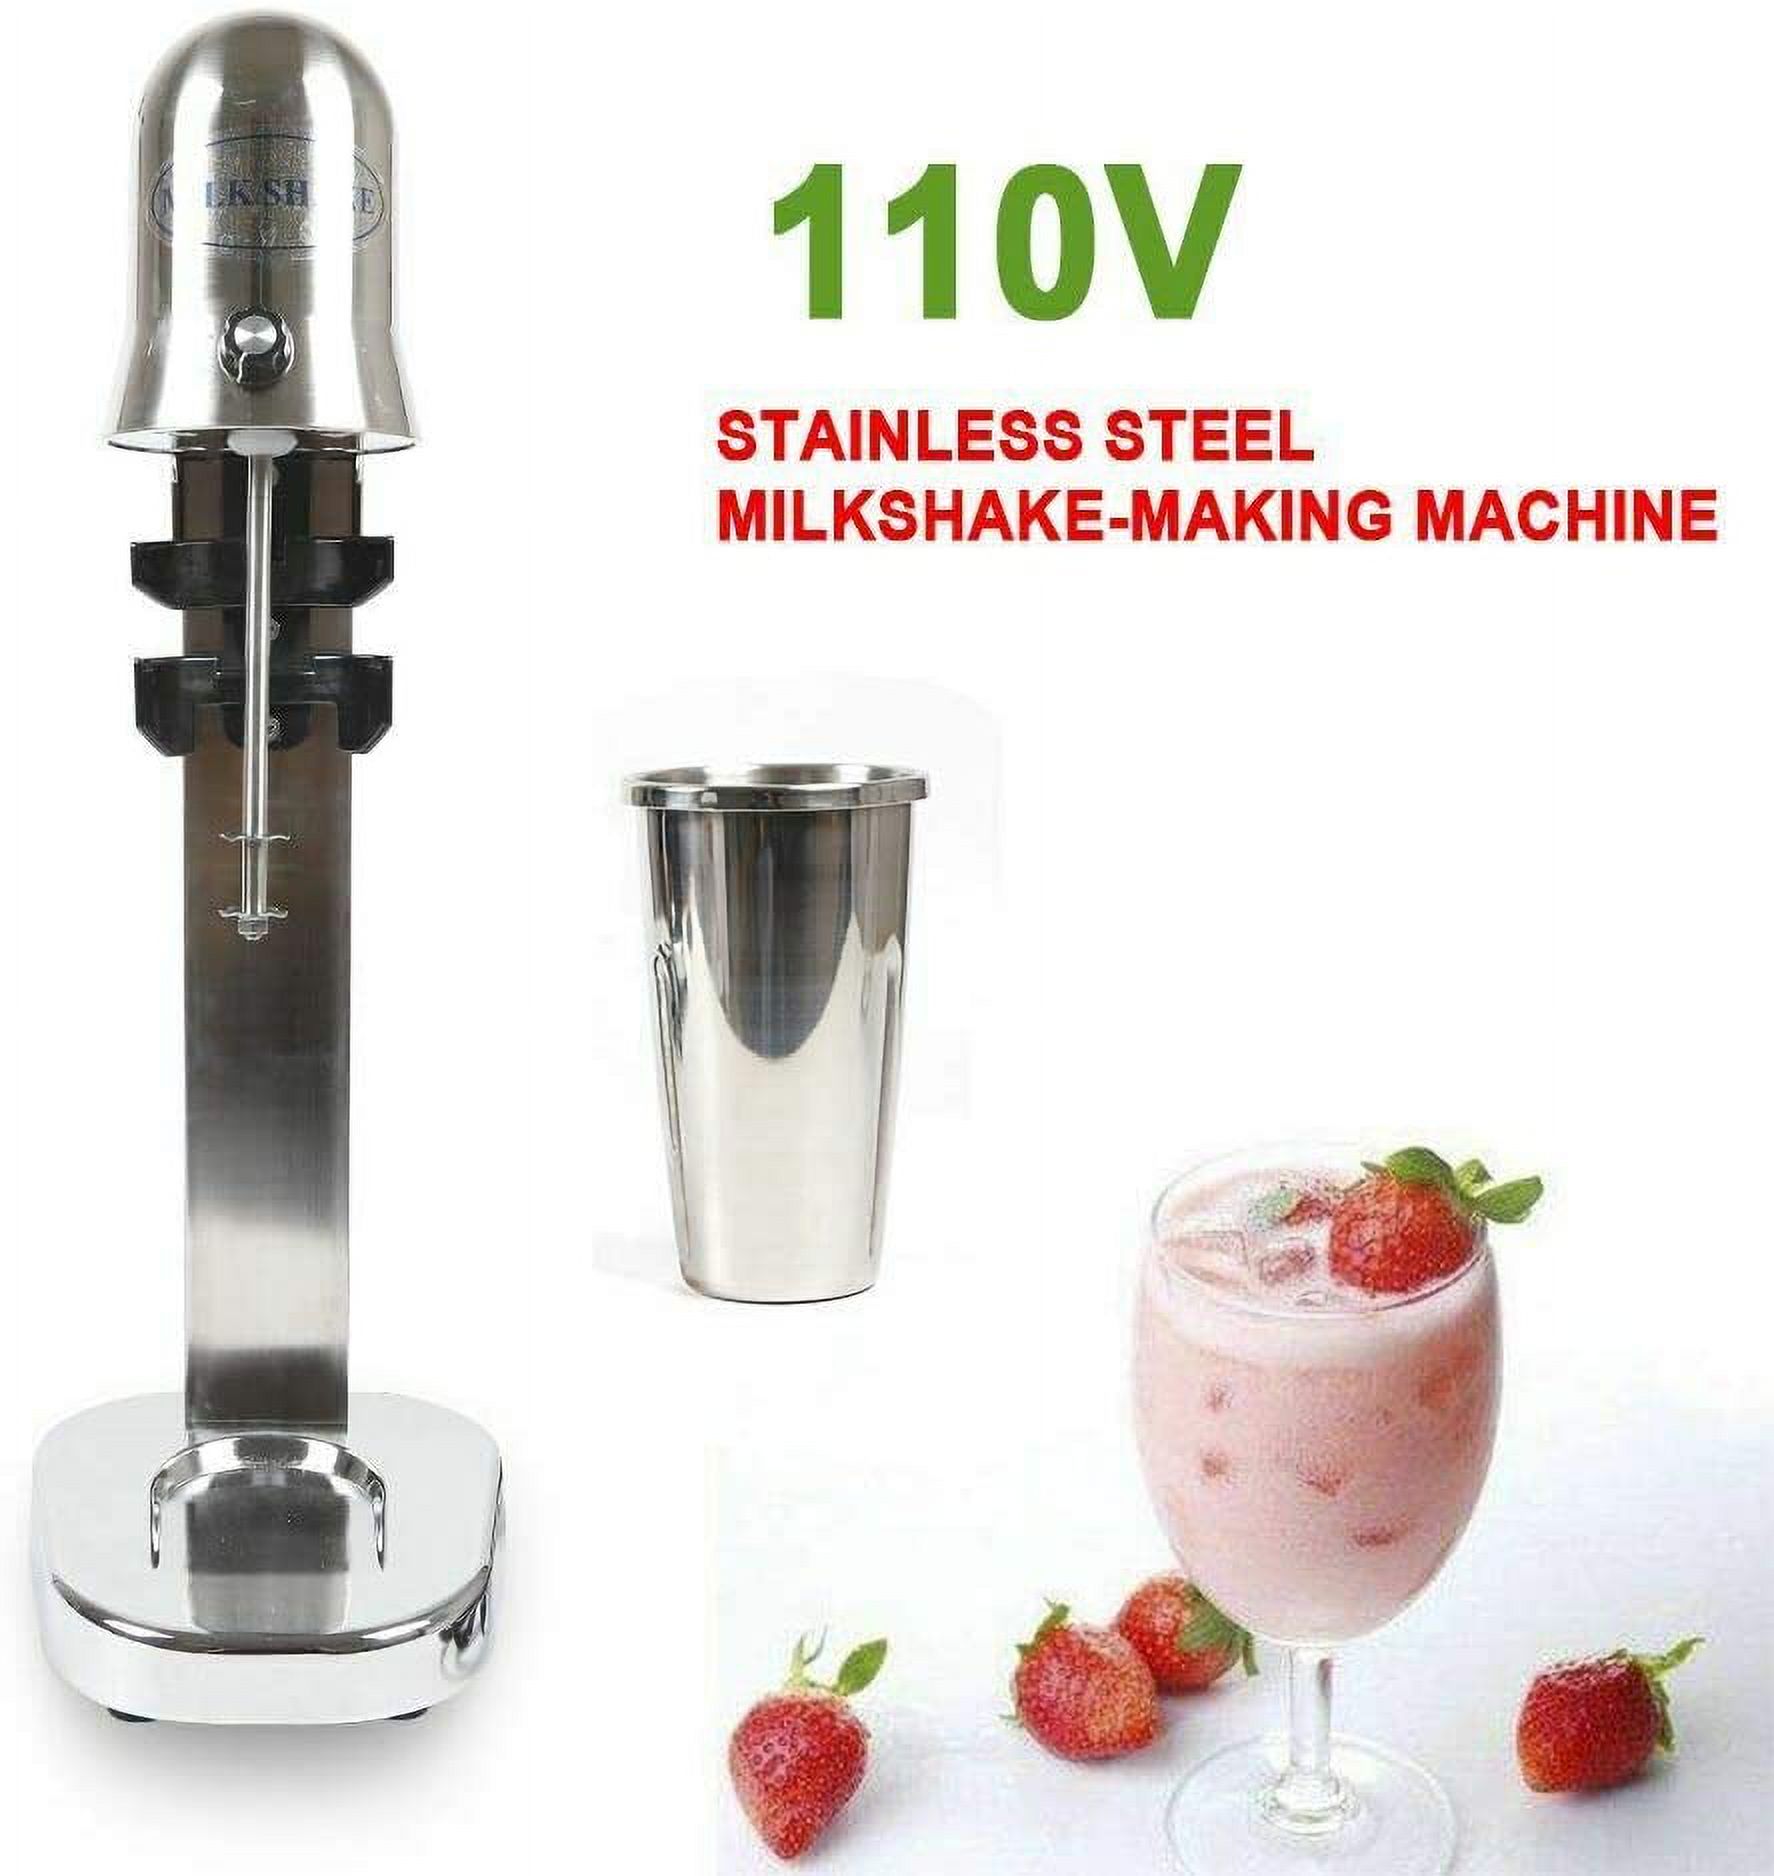 Electric Milk Shaker 110V 60HZ 280W 18000RMP Commercial Stainless Steel Drink Mixer Machine Smoothie Malt Blender 4.5KG with 2 Speed Adjustable for Home Shop (Round Head) - image 2 of 8